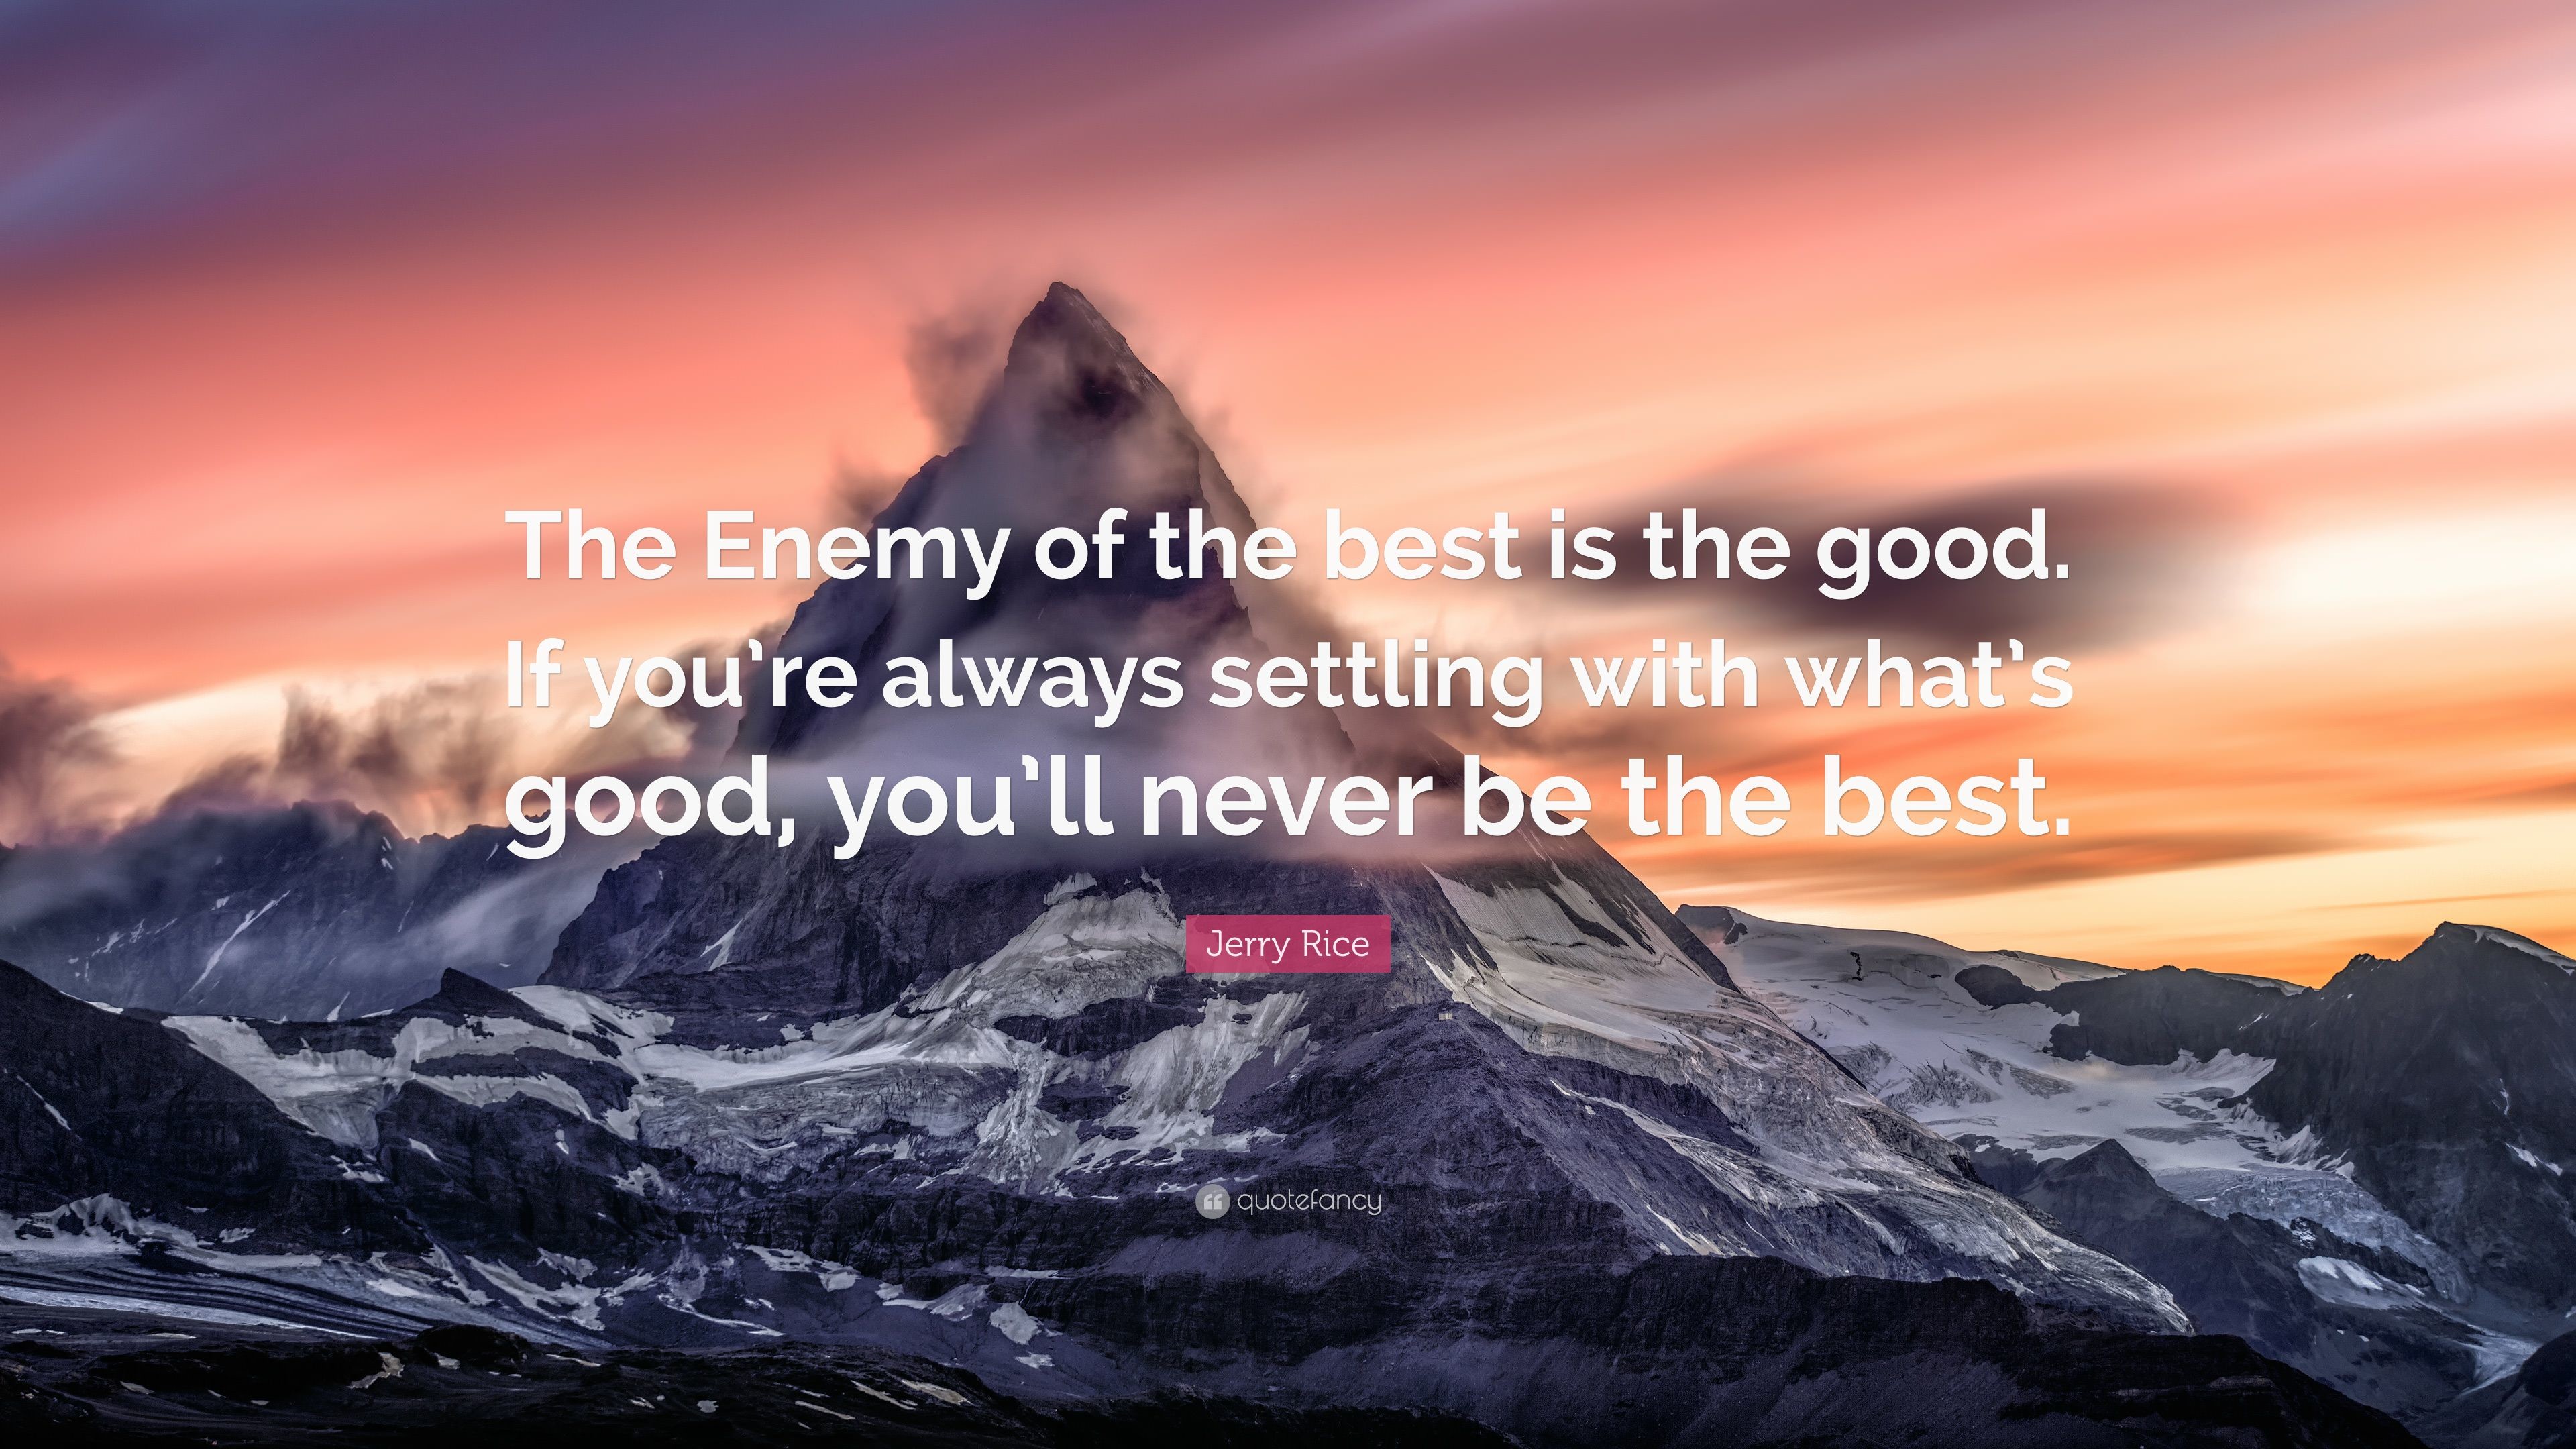 Jerry Rice Quote: “The Enemy of the best is the good. If you